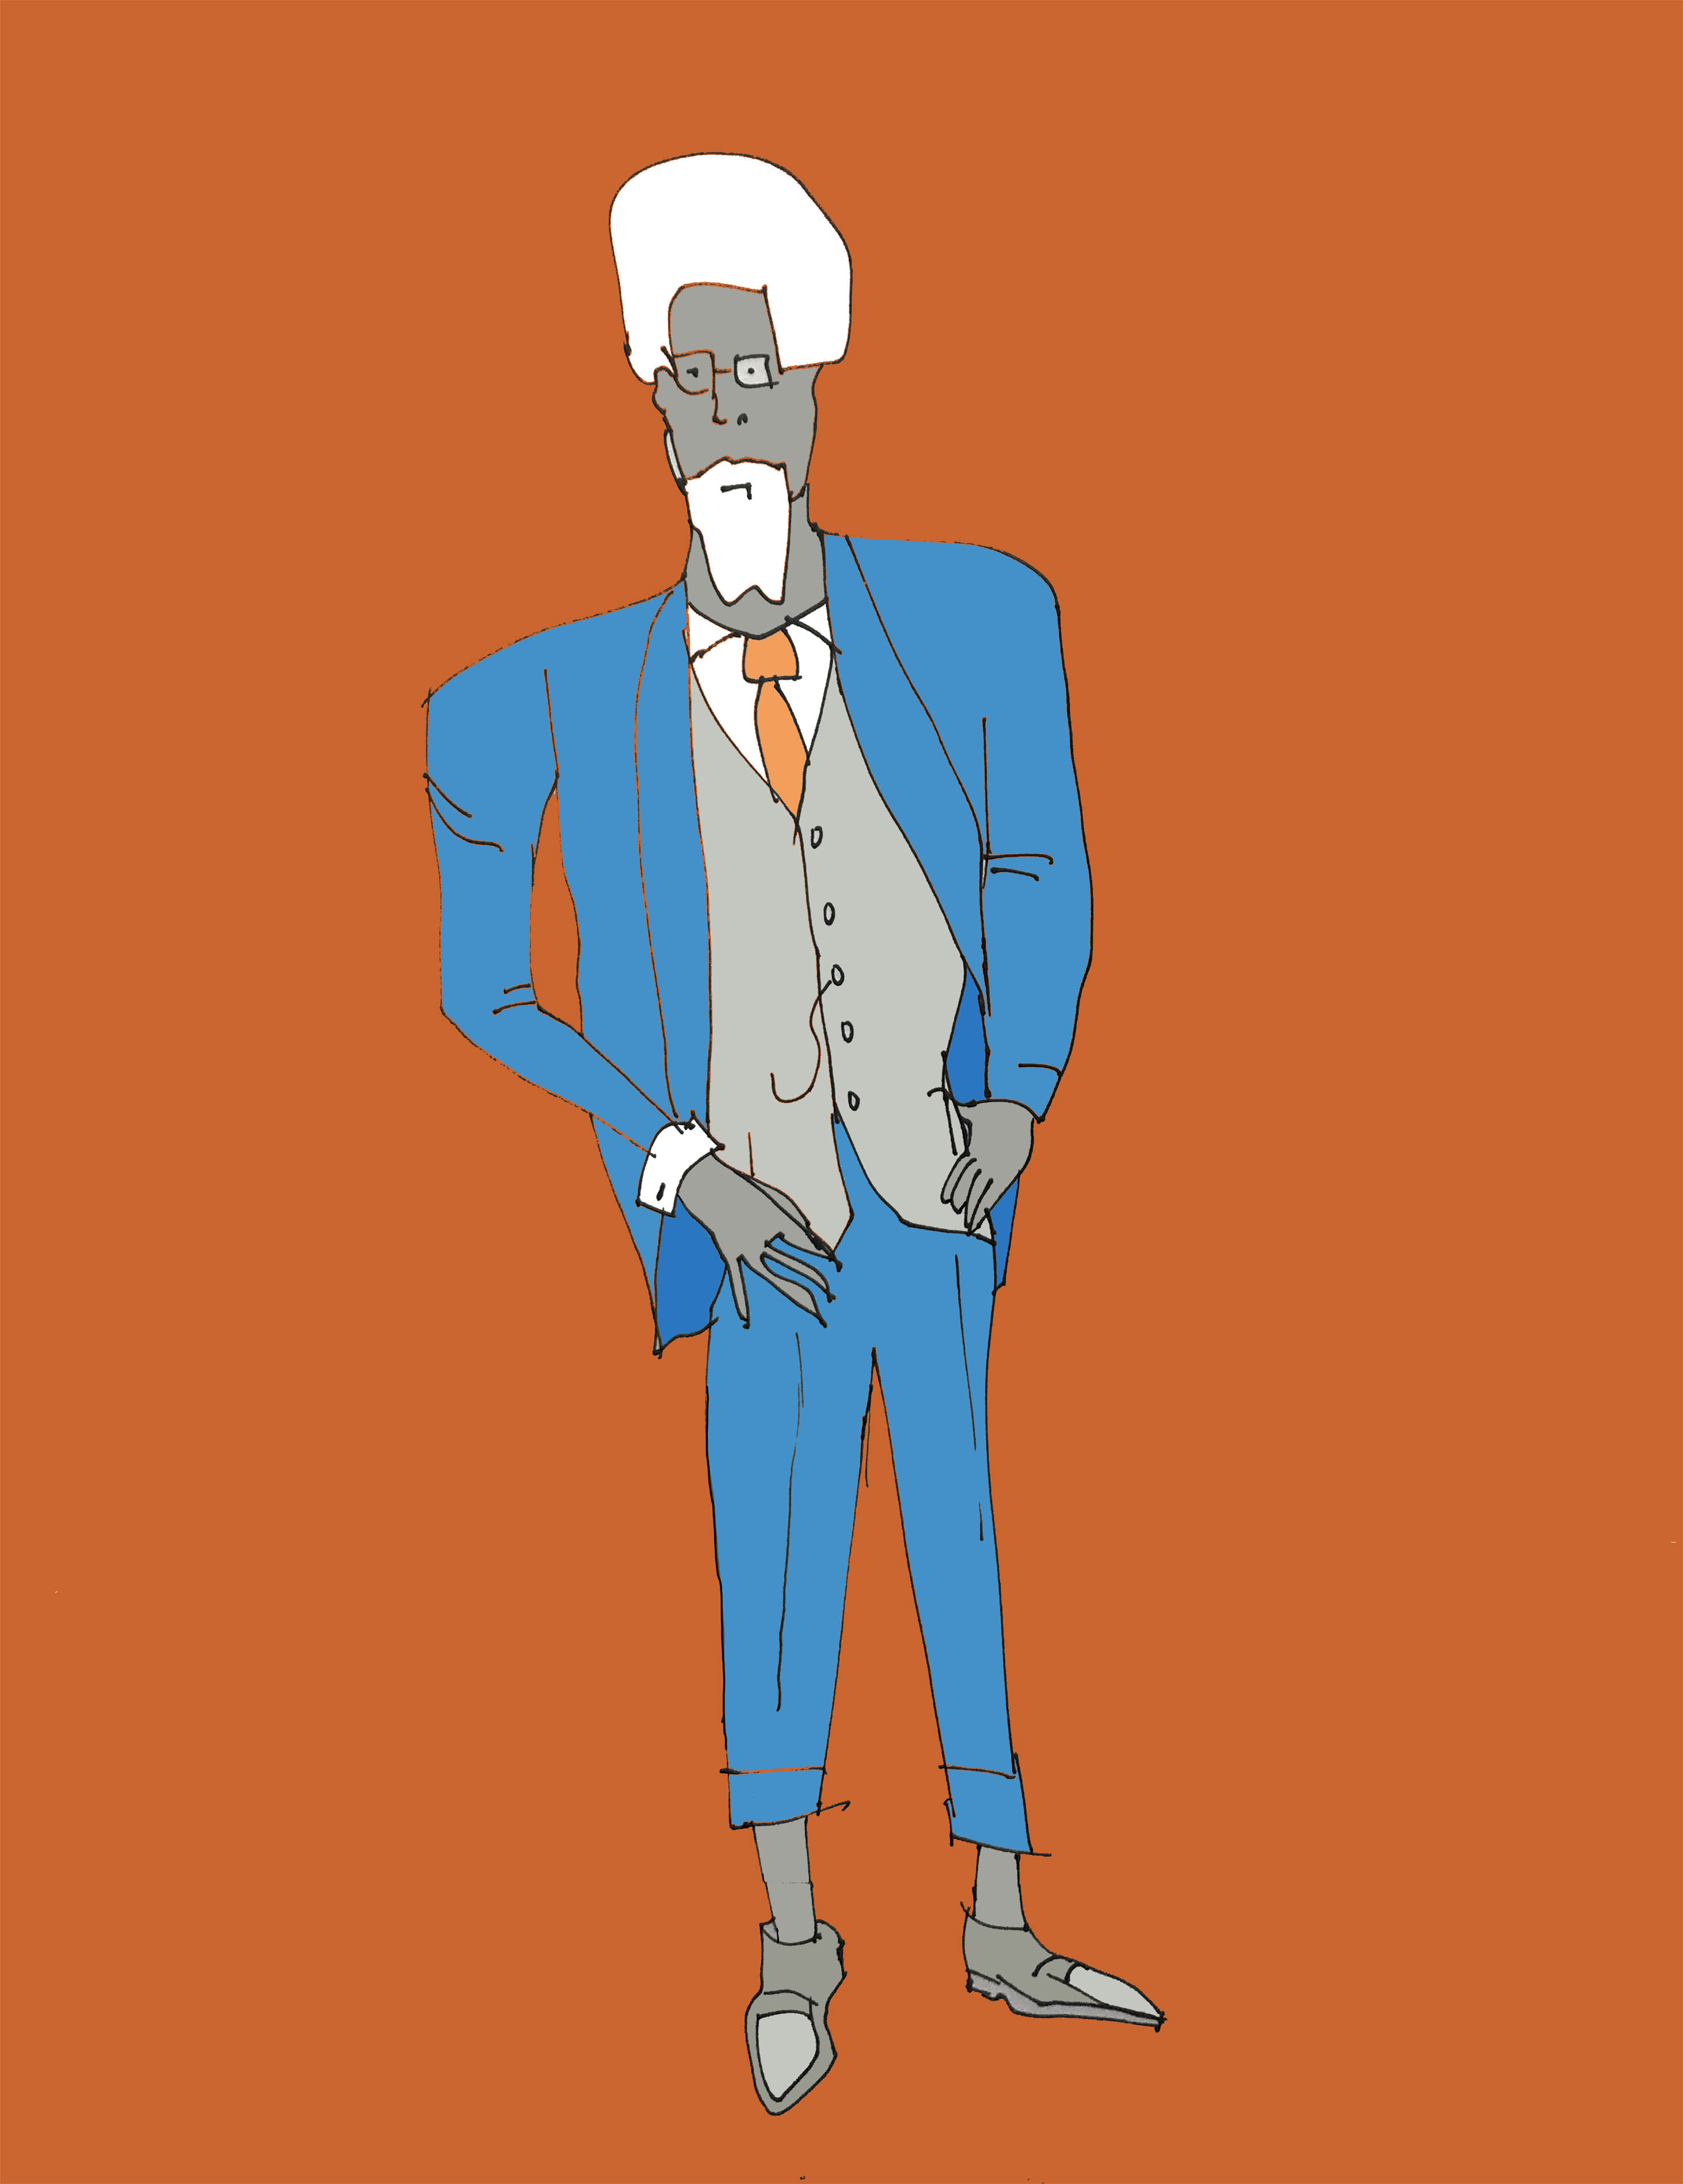 art every day number 234 / illustration / suit